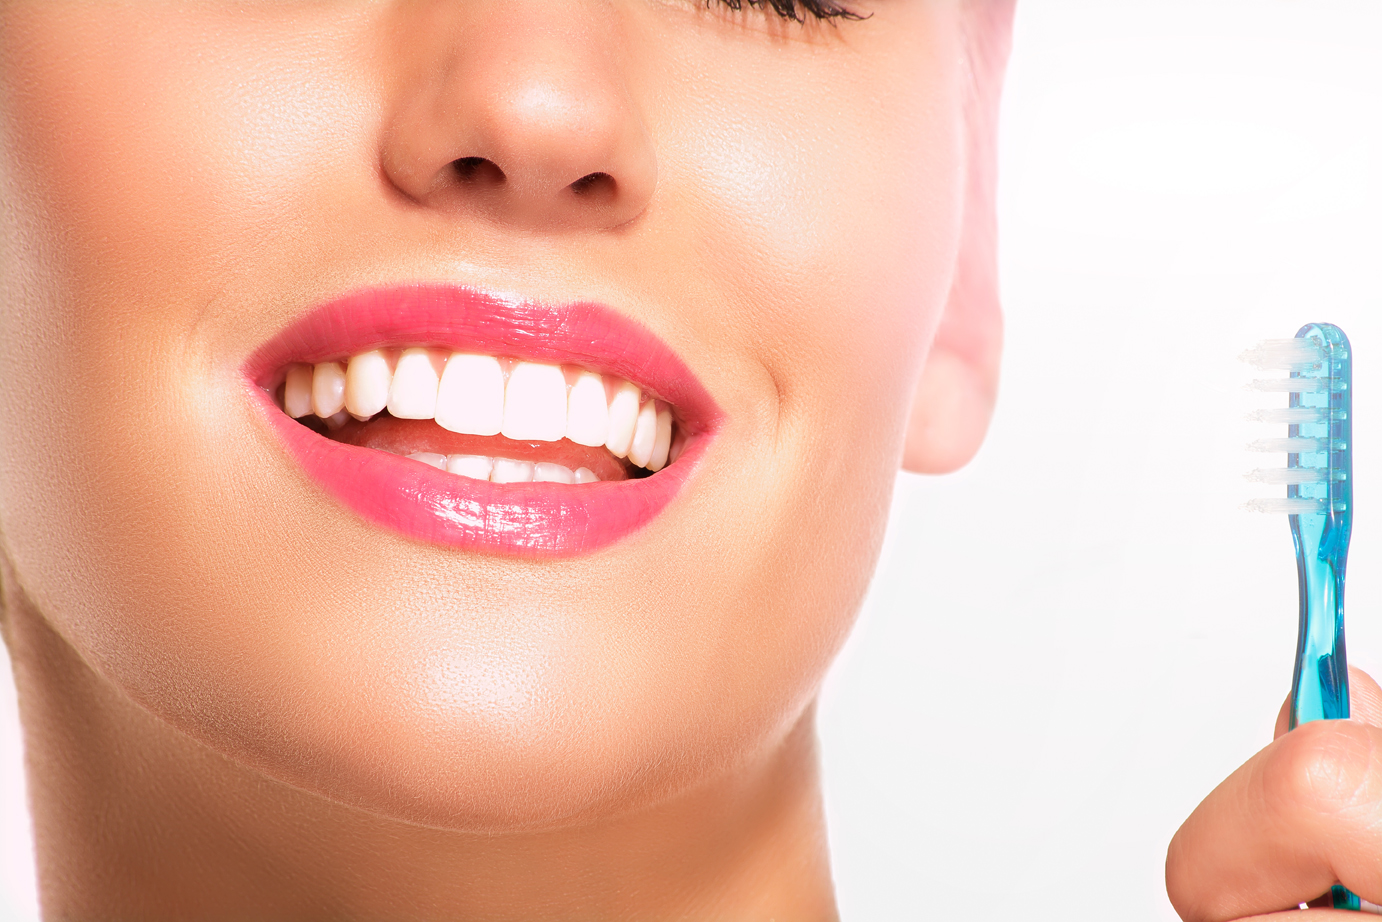 patchy teeth after zoom whitening